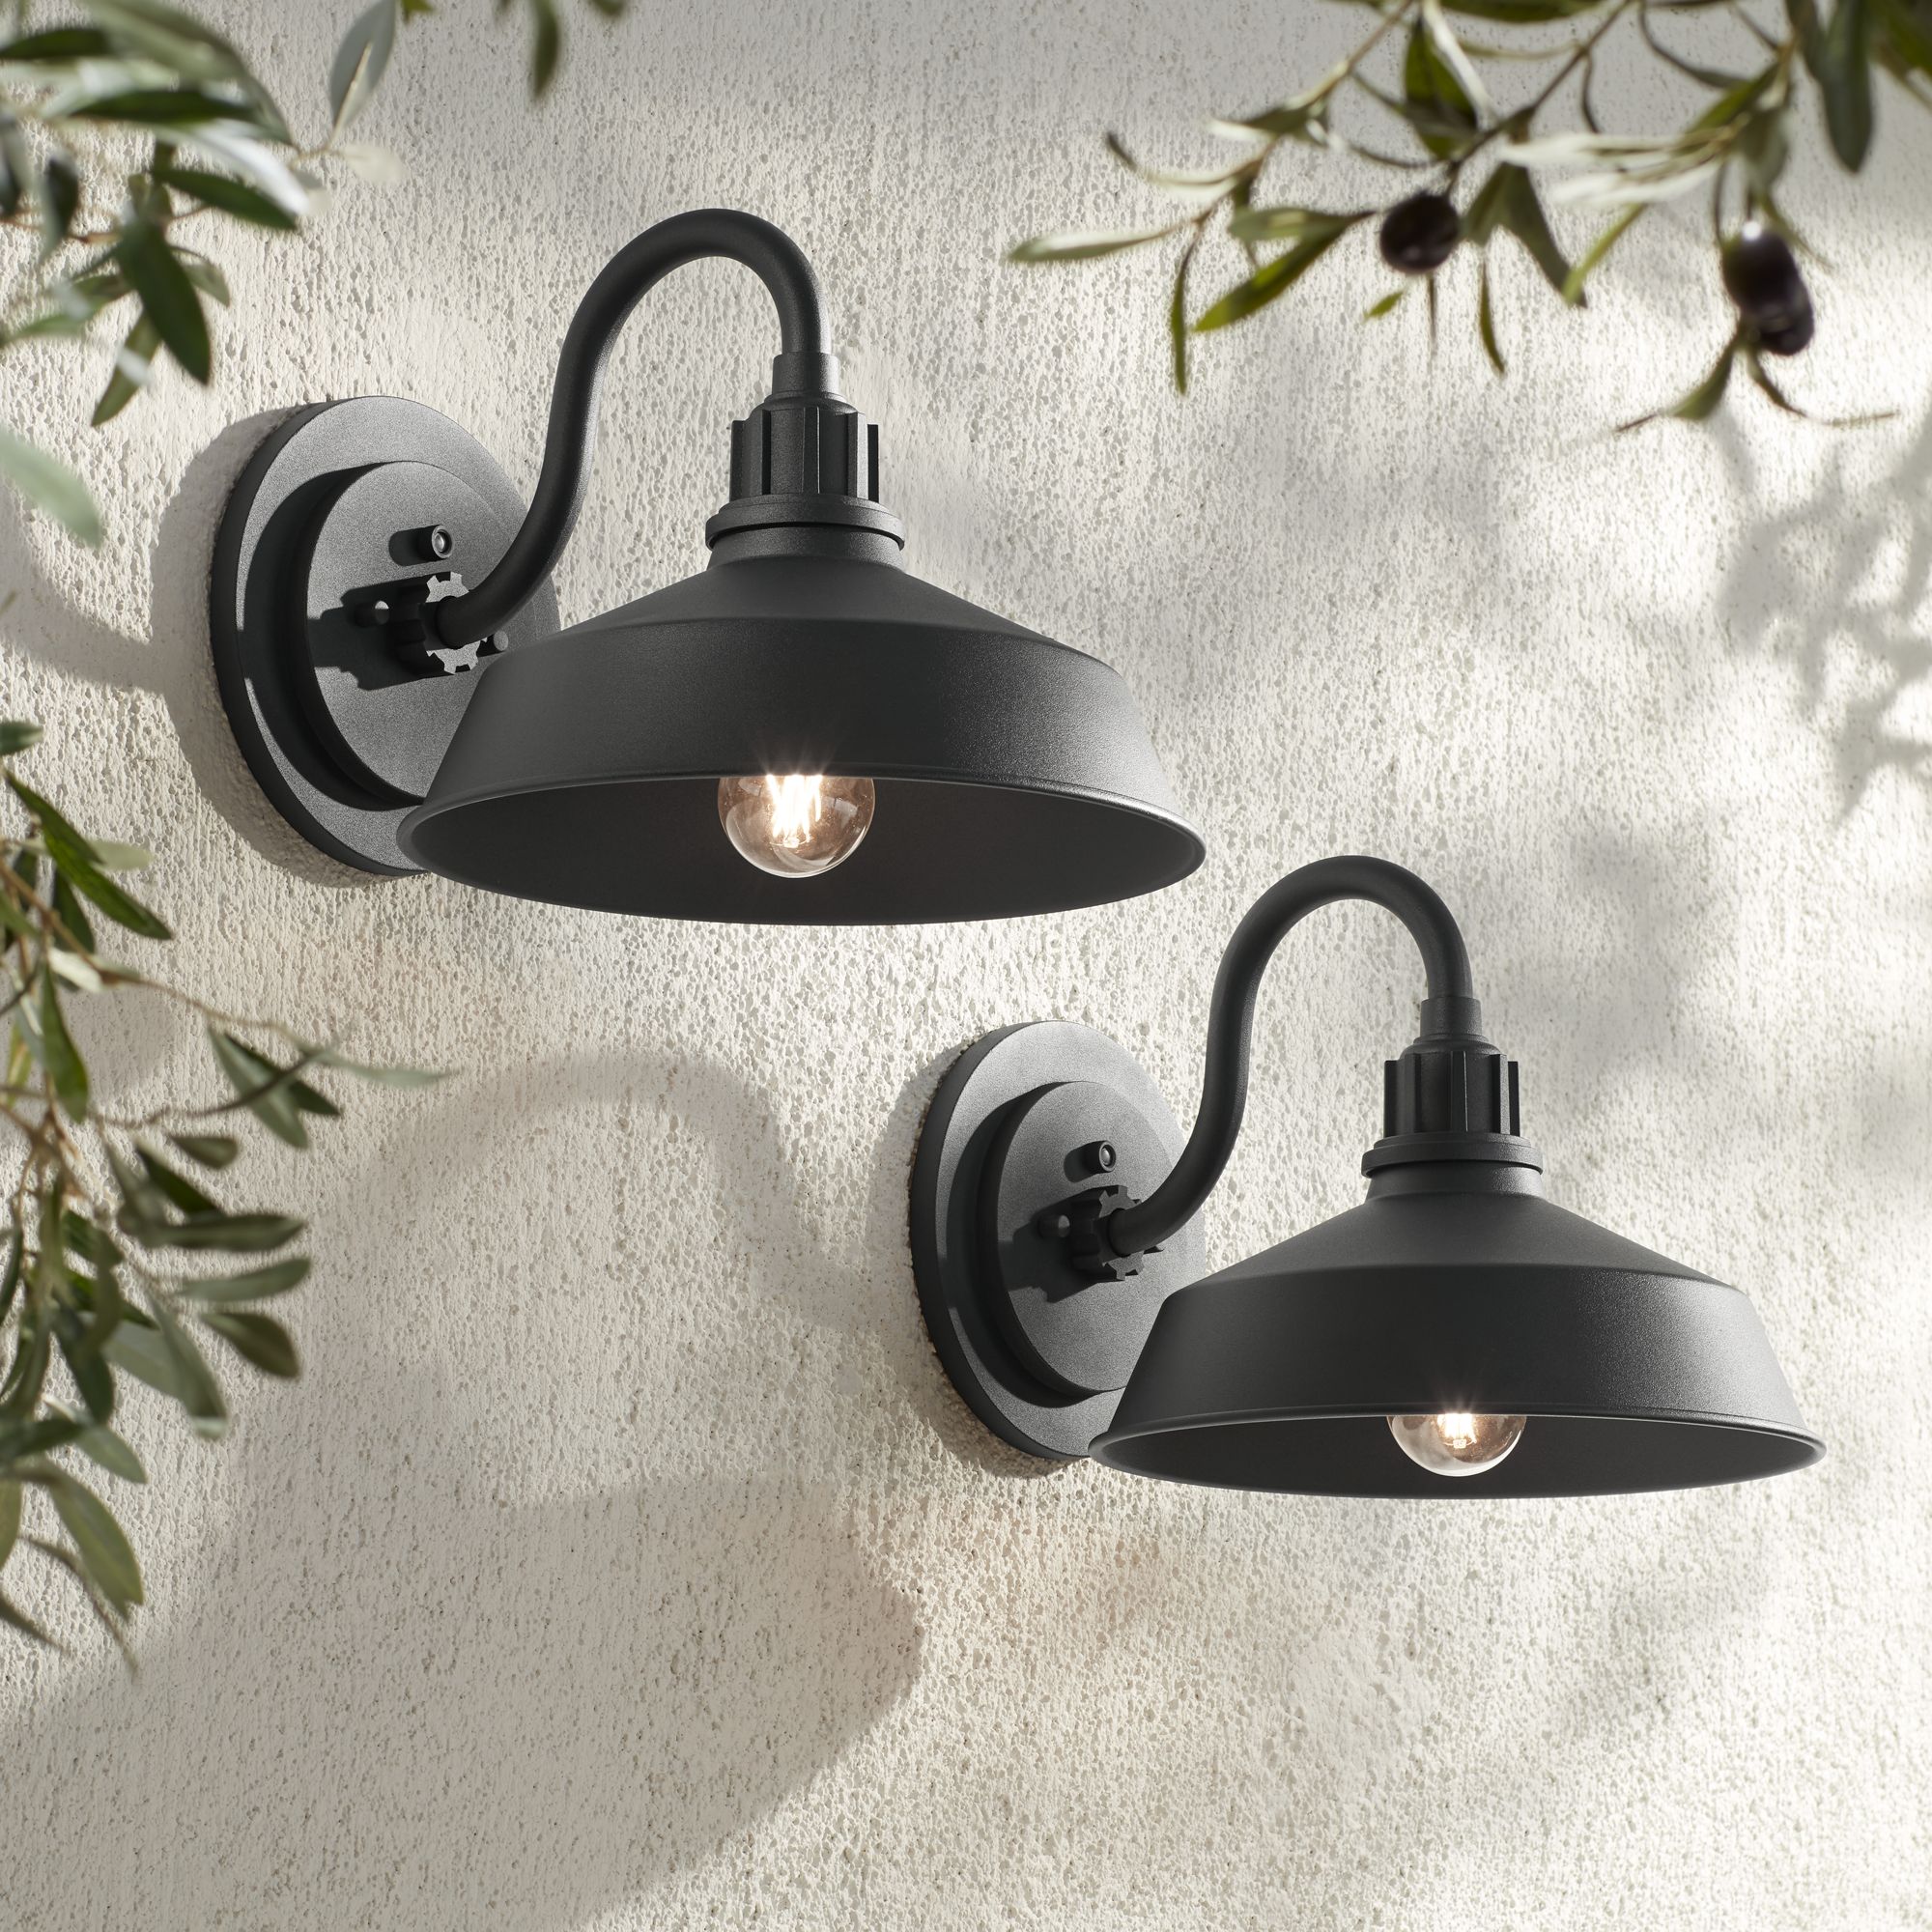 kenable Wall-Mounted Lamp Outdoor Garden Light with Dusk to Dawn Sensor Black 